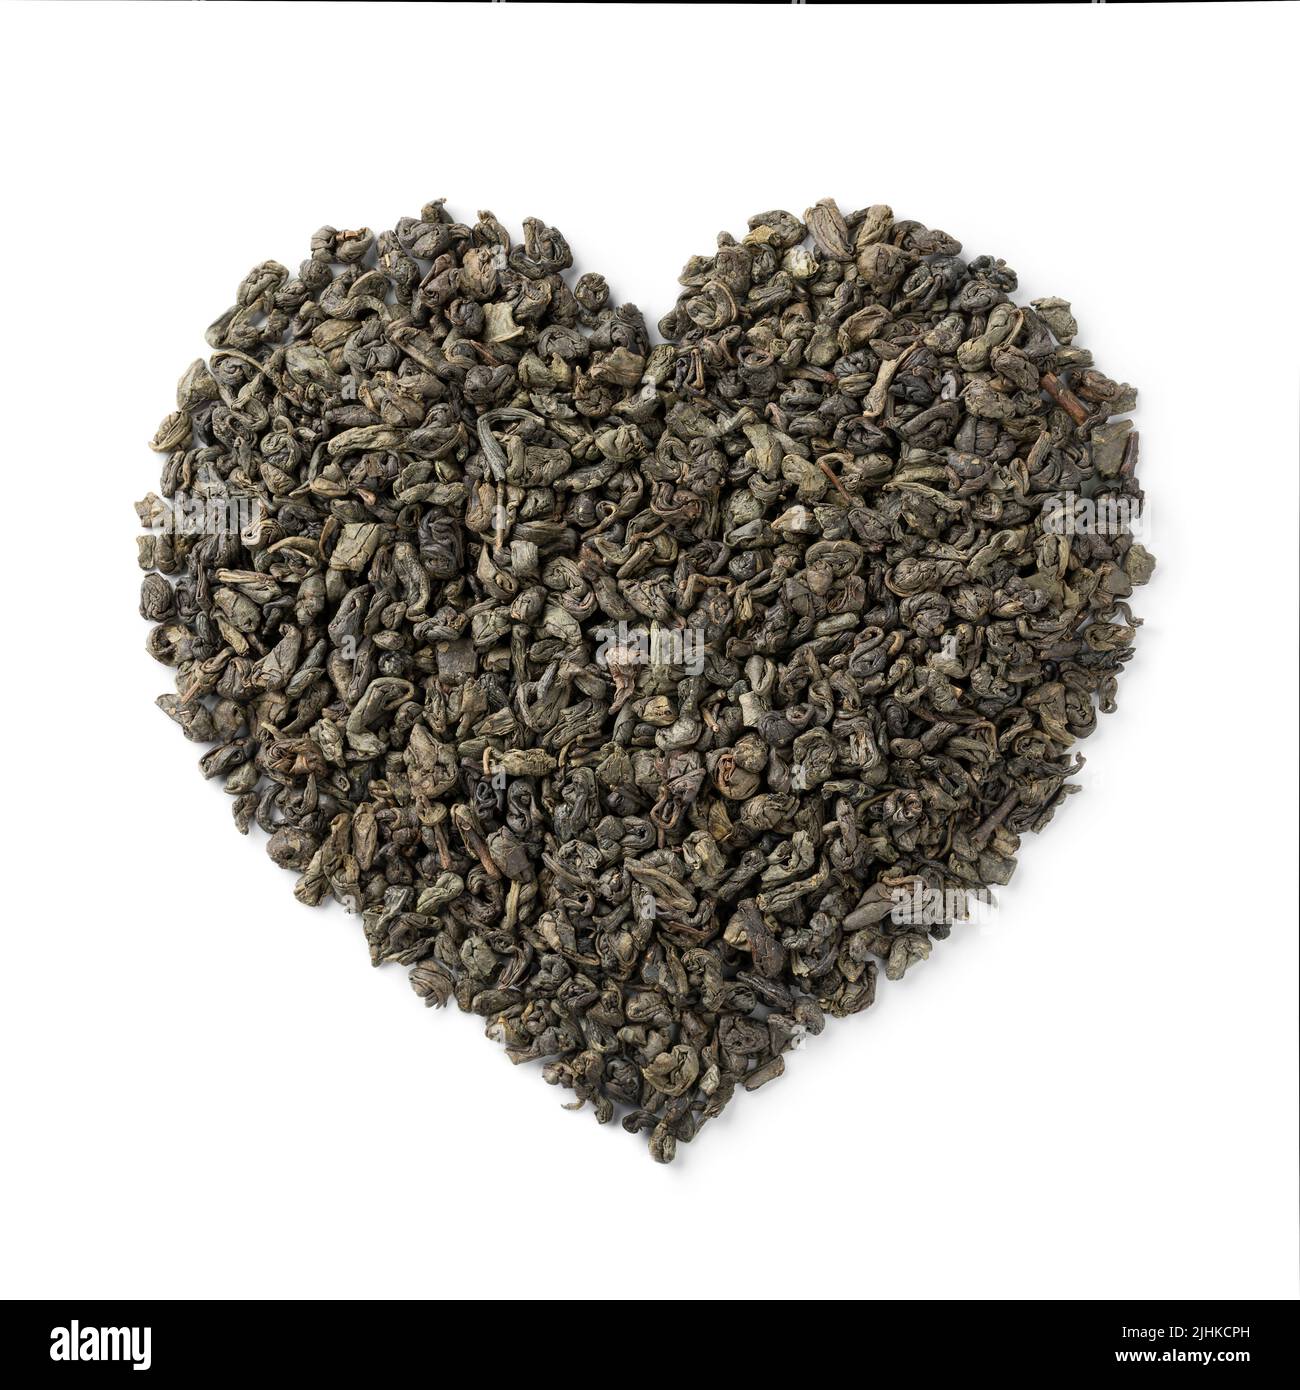 Dried traditional Gunpowder tea leaves in heart shape close up isolated on white background Stock Photo